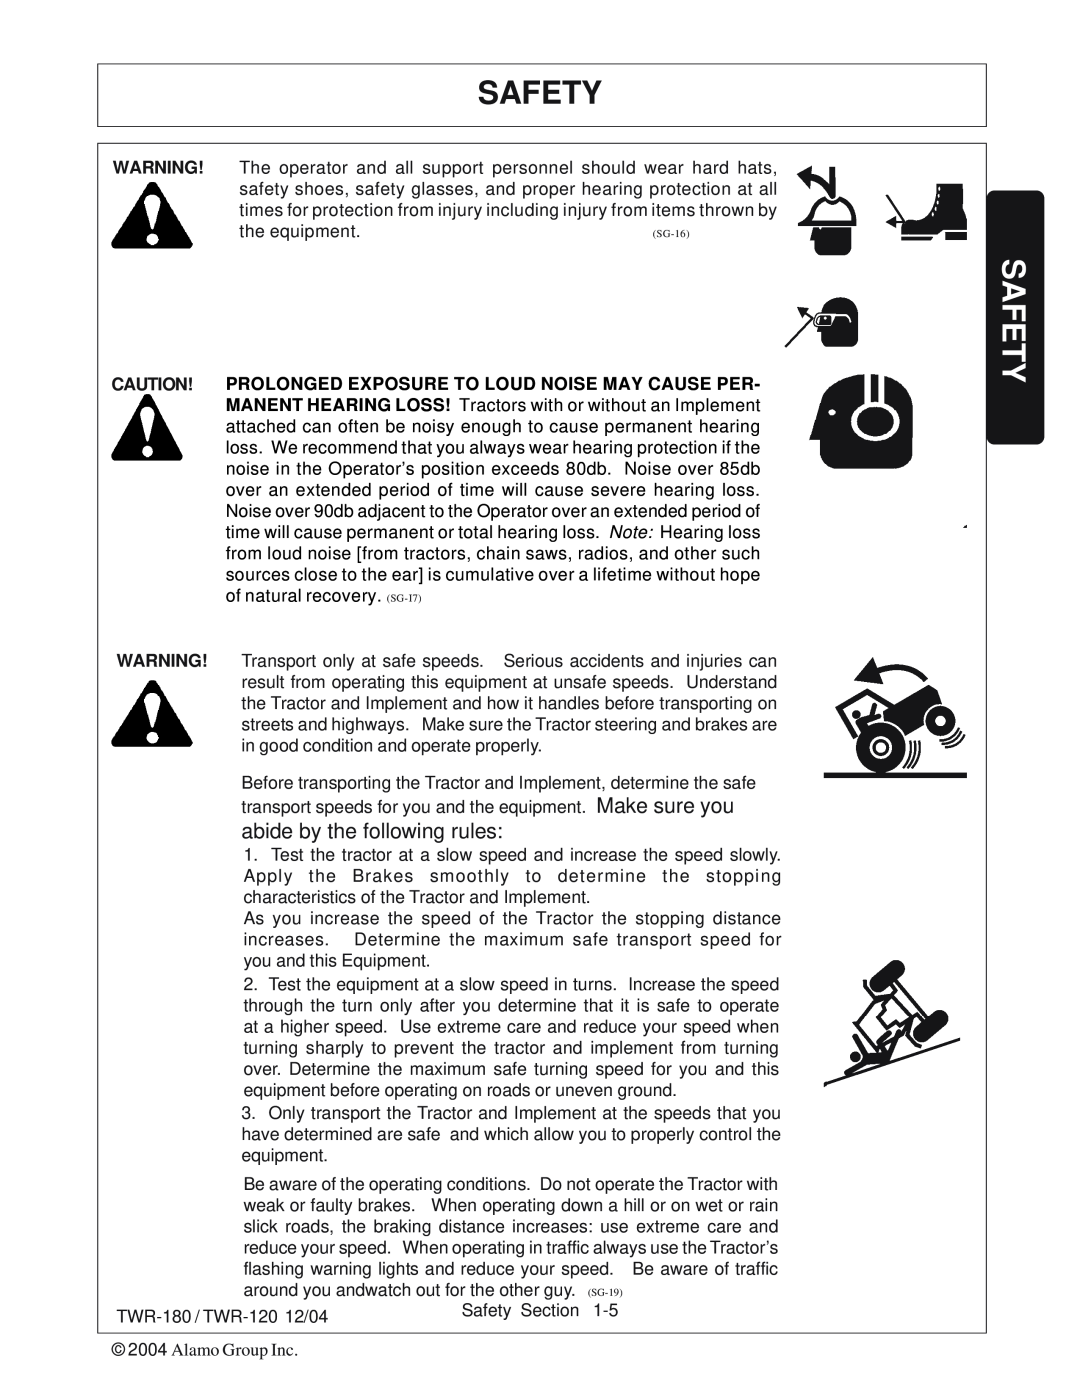 Tiger Products Co., Ltd TWR-120, TWR-180 manual Safety, abide by the following rules 